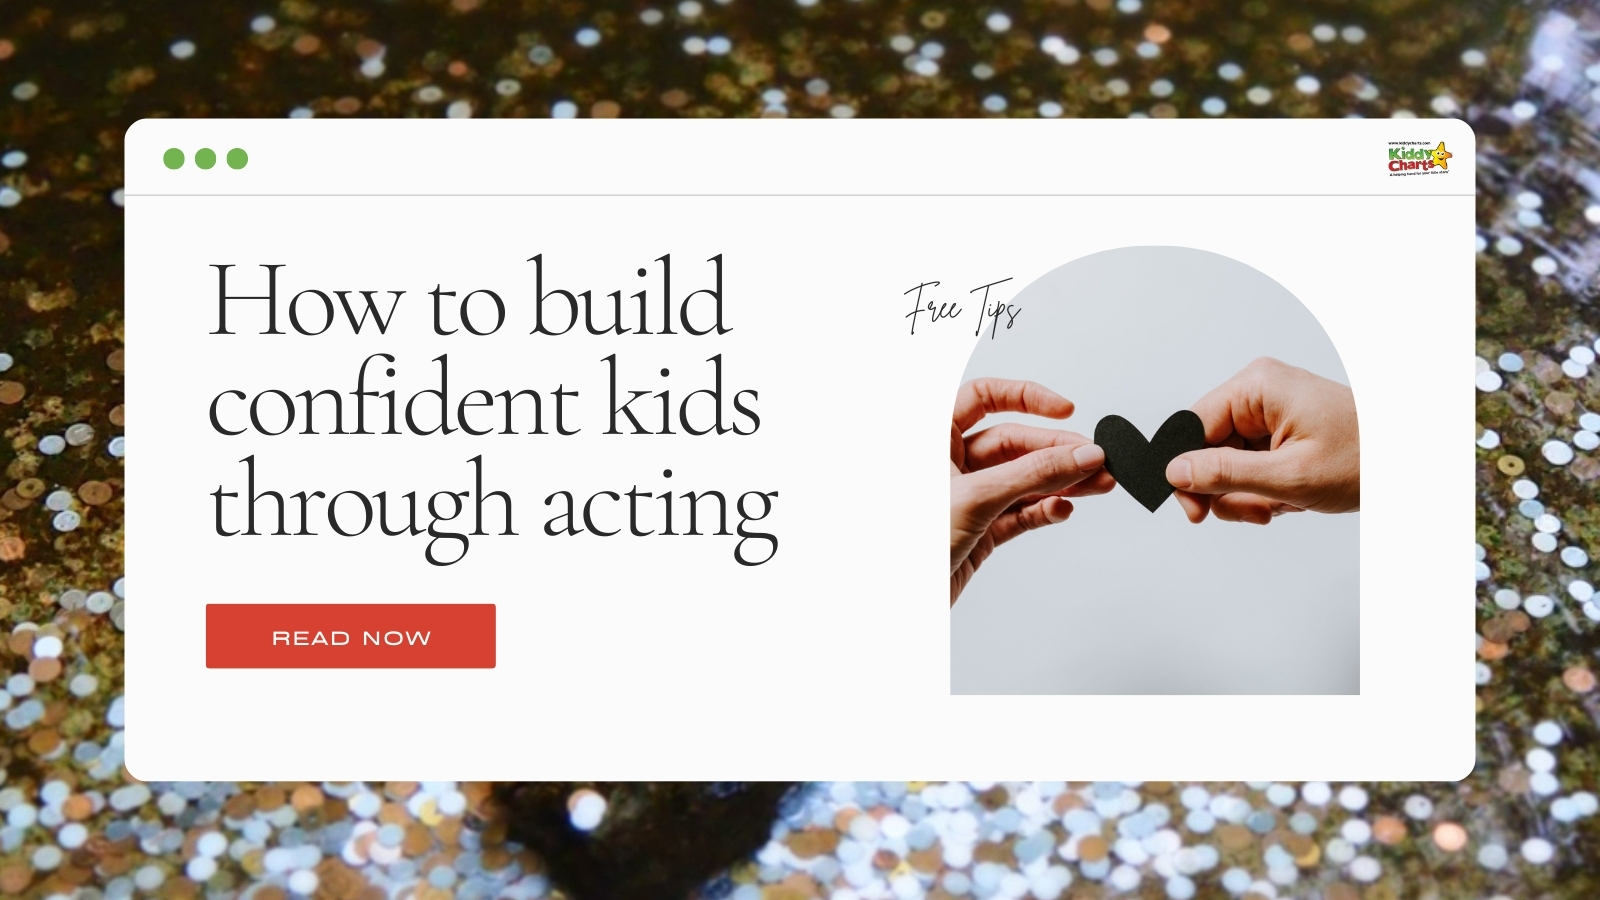 Cultivating confidence in kids through acting: Our tip for confidence building activities for kids